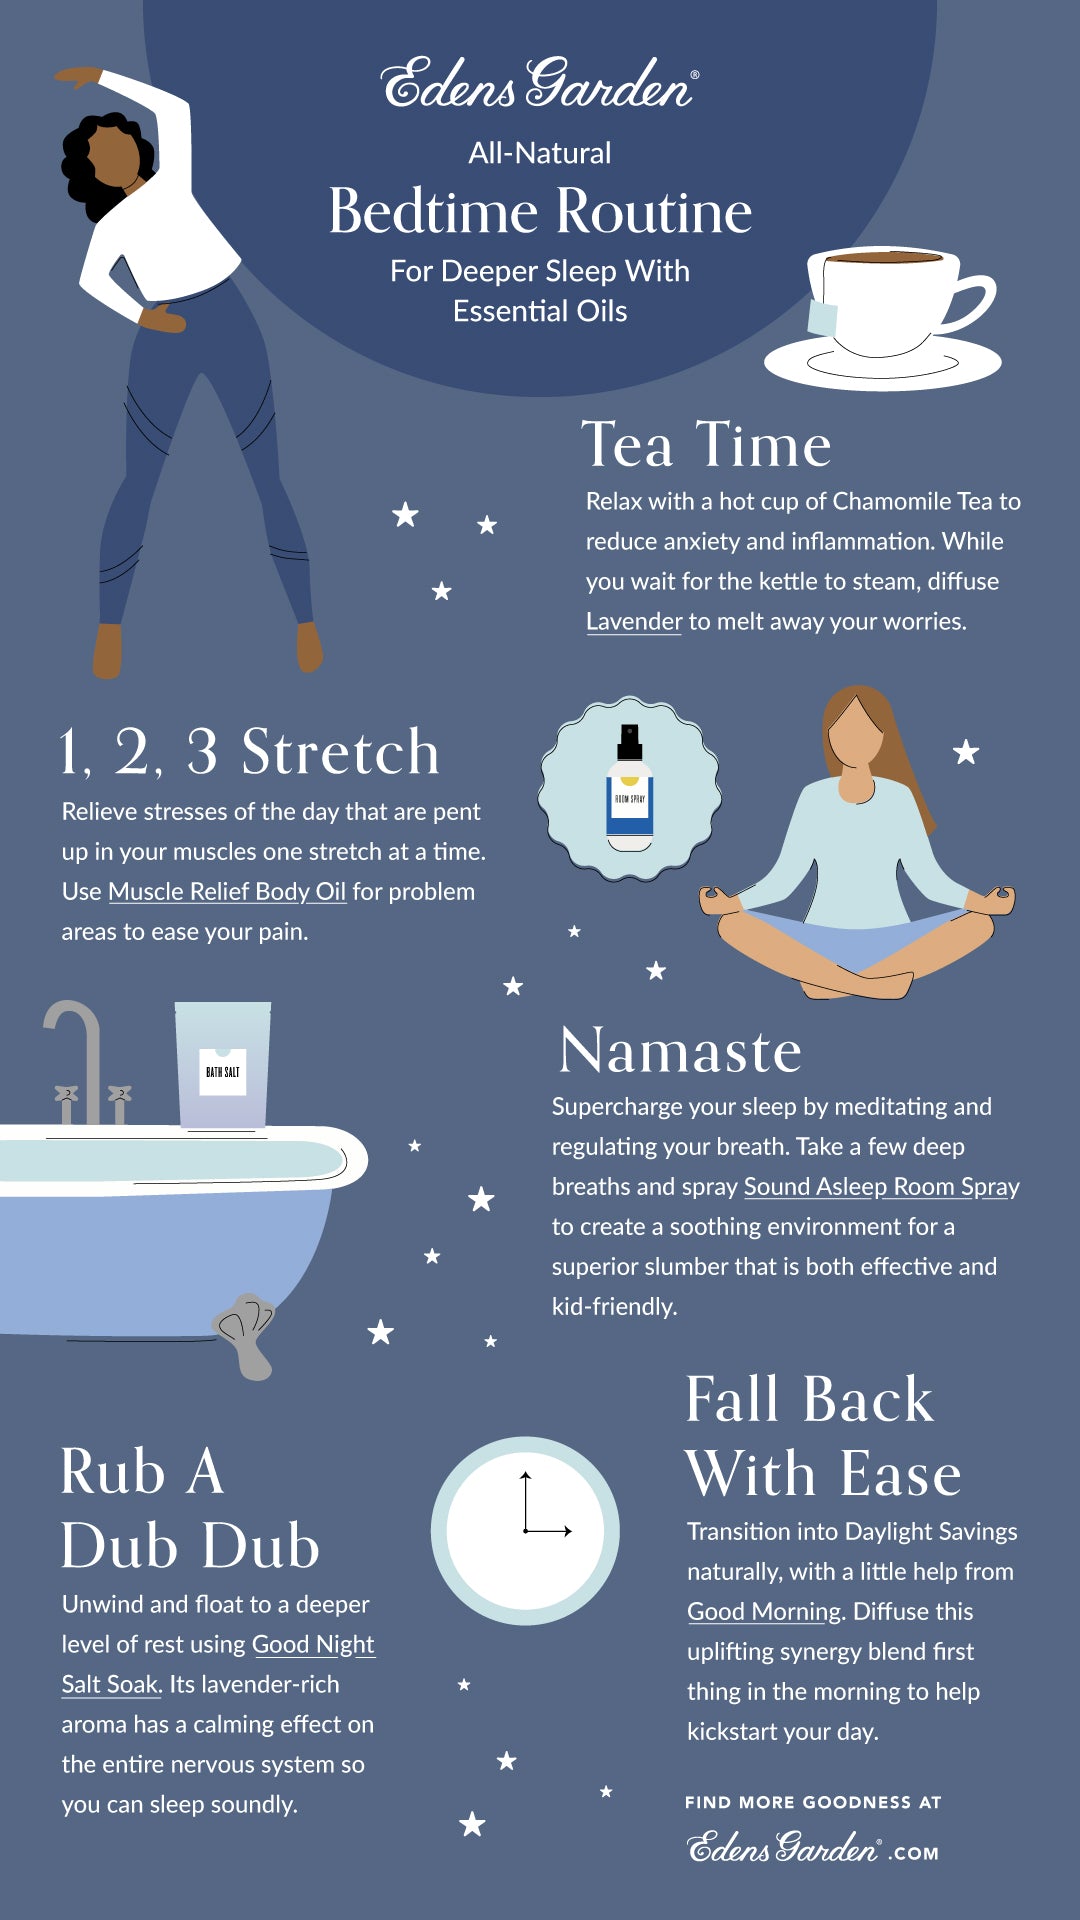 Soothing Slumber: How to Create a Relaxing Bedtime Ritual